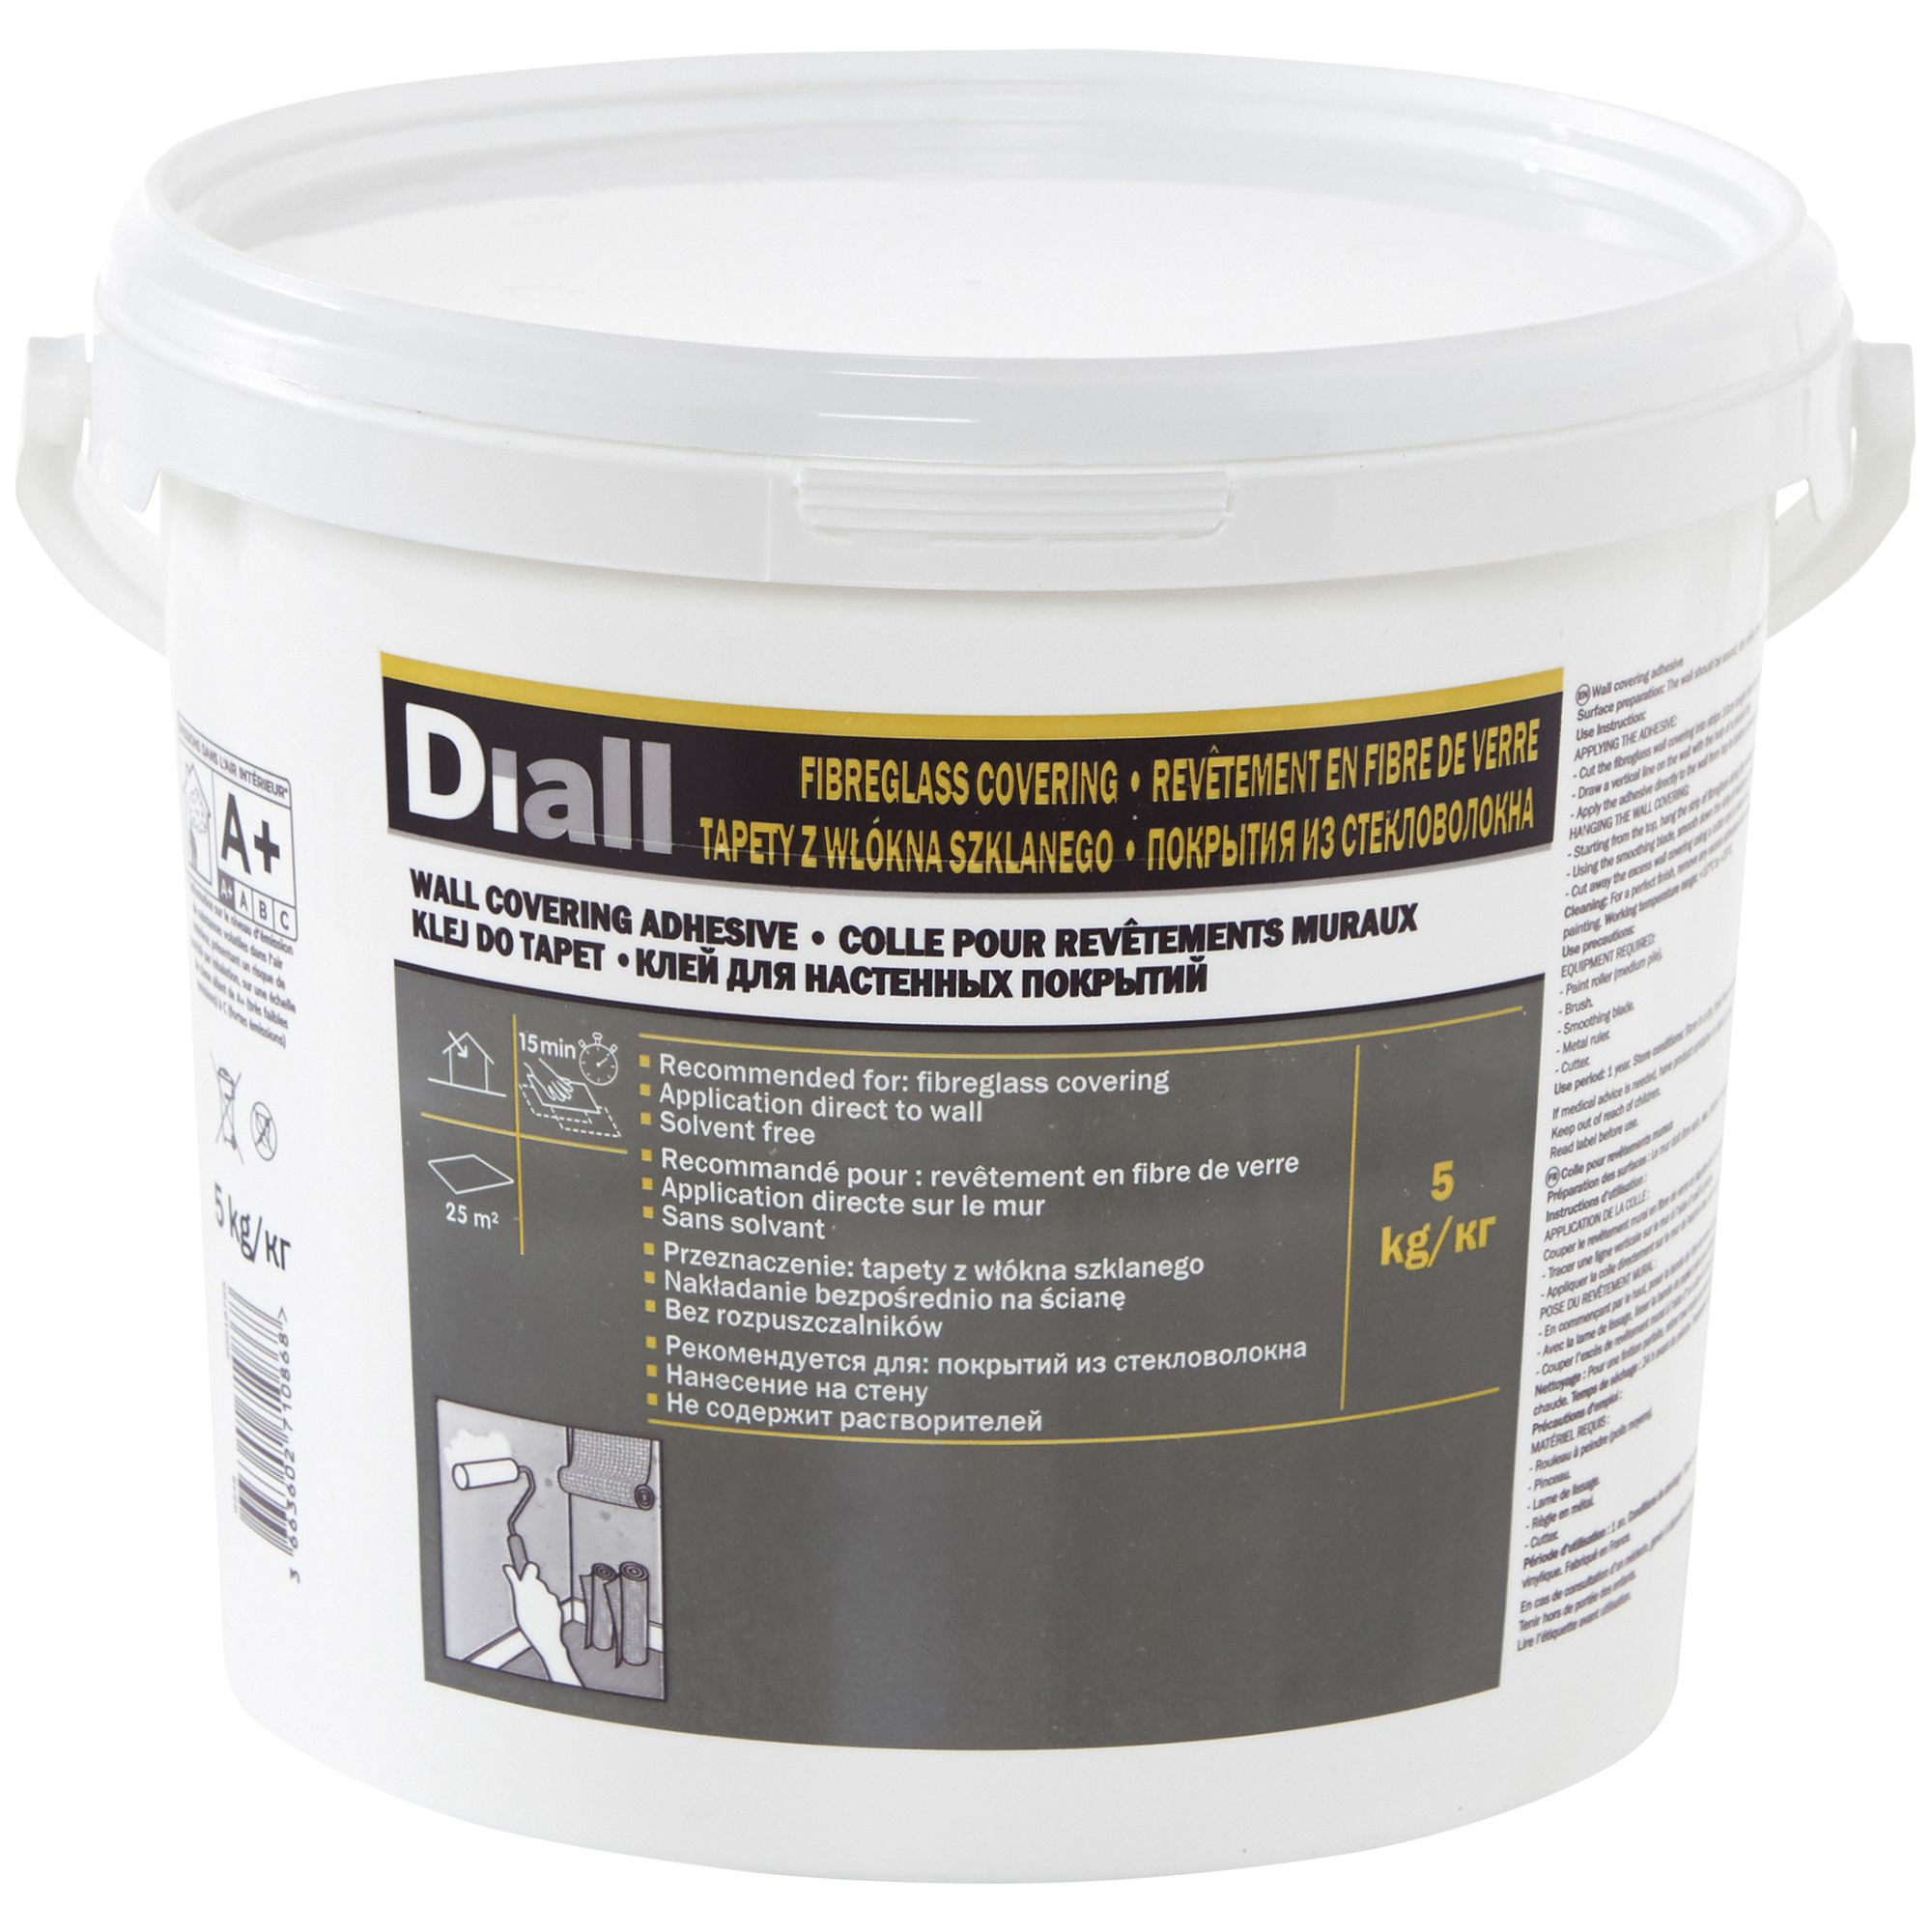 Diall Ready mixed Wall covering Adhesive 5kg